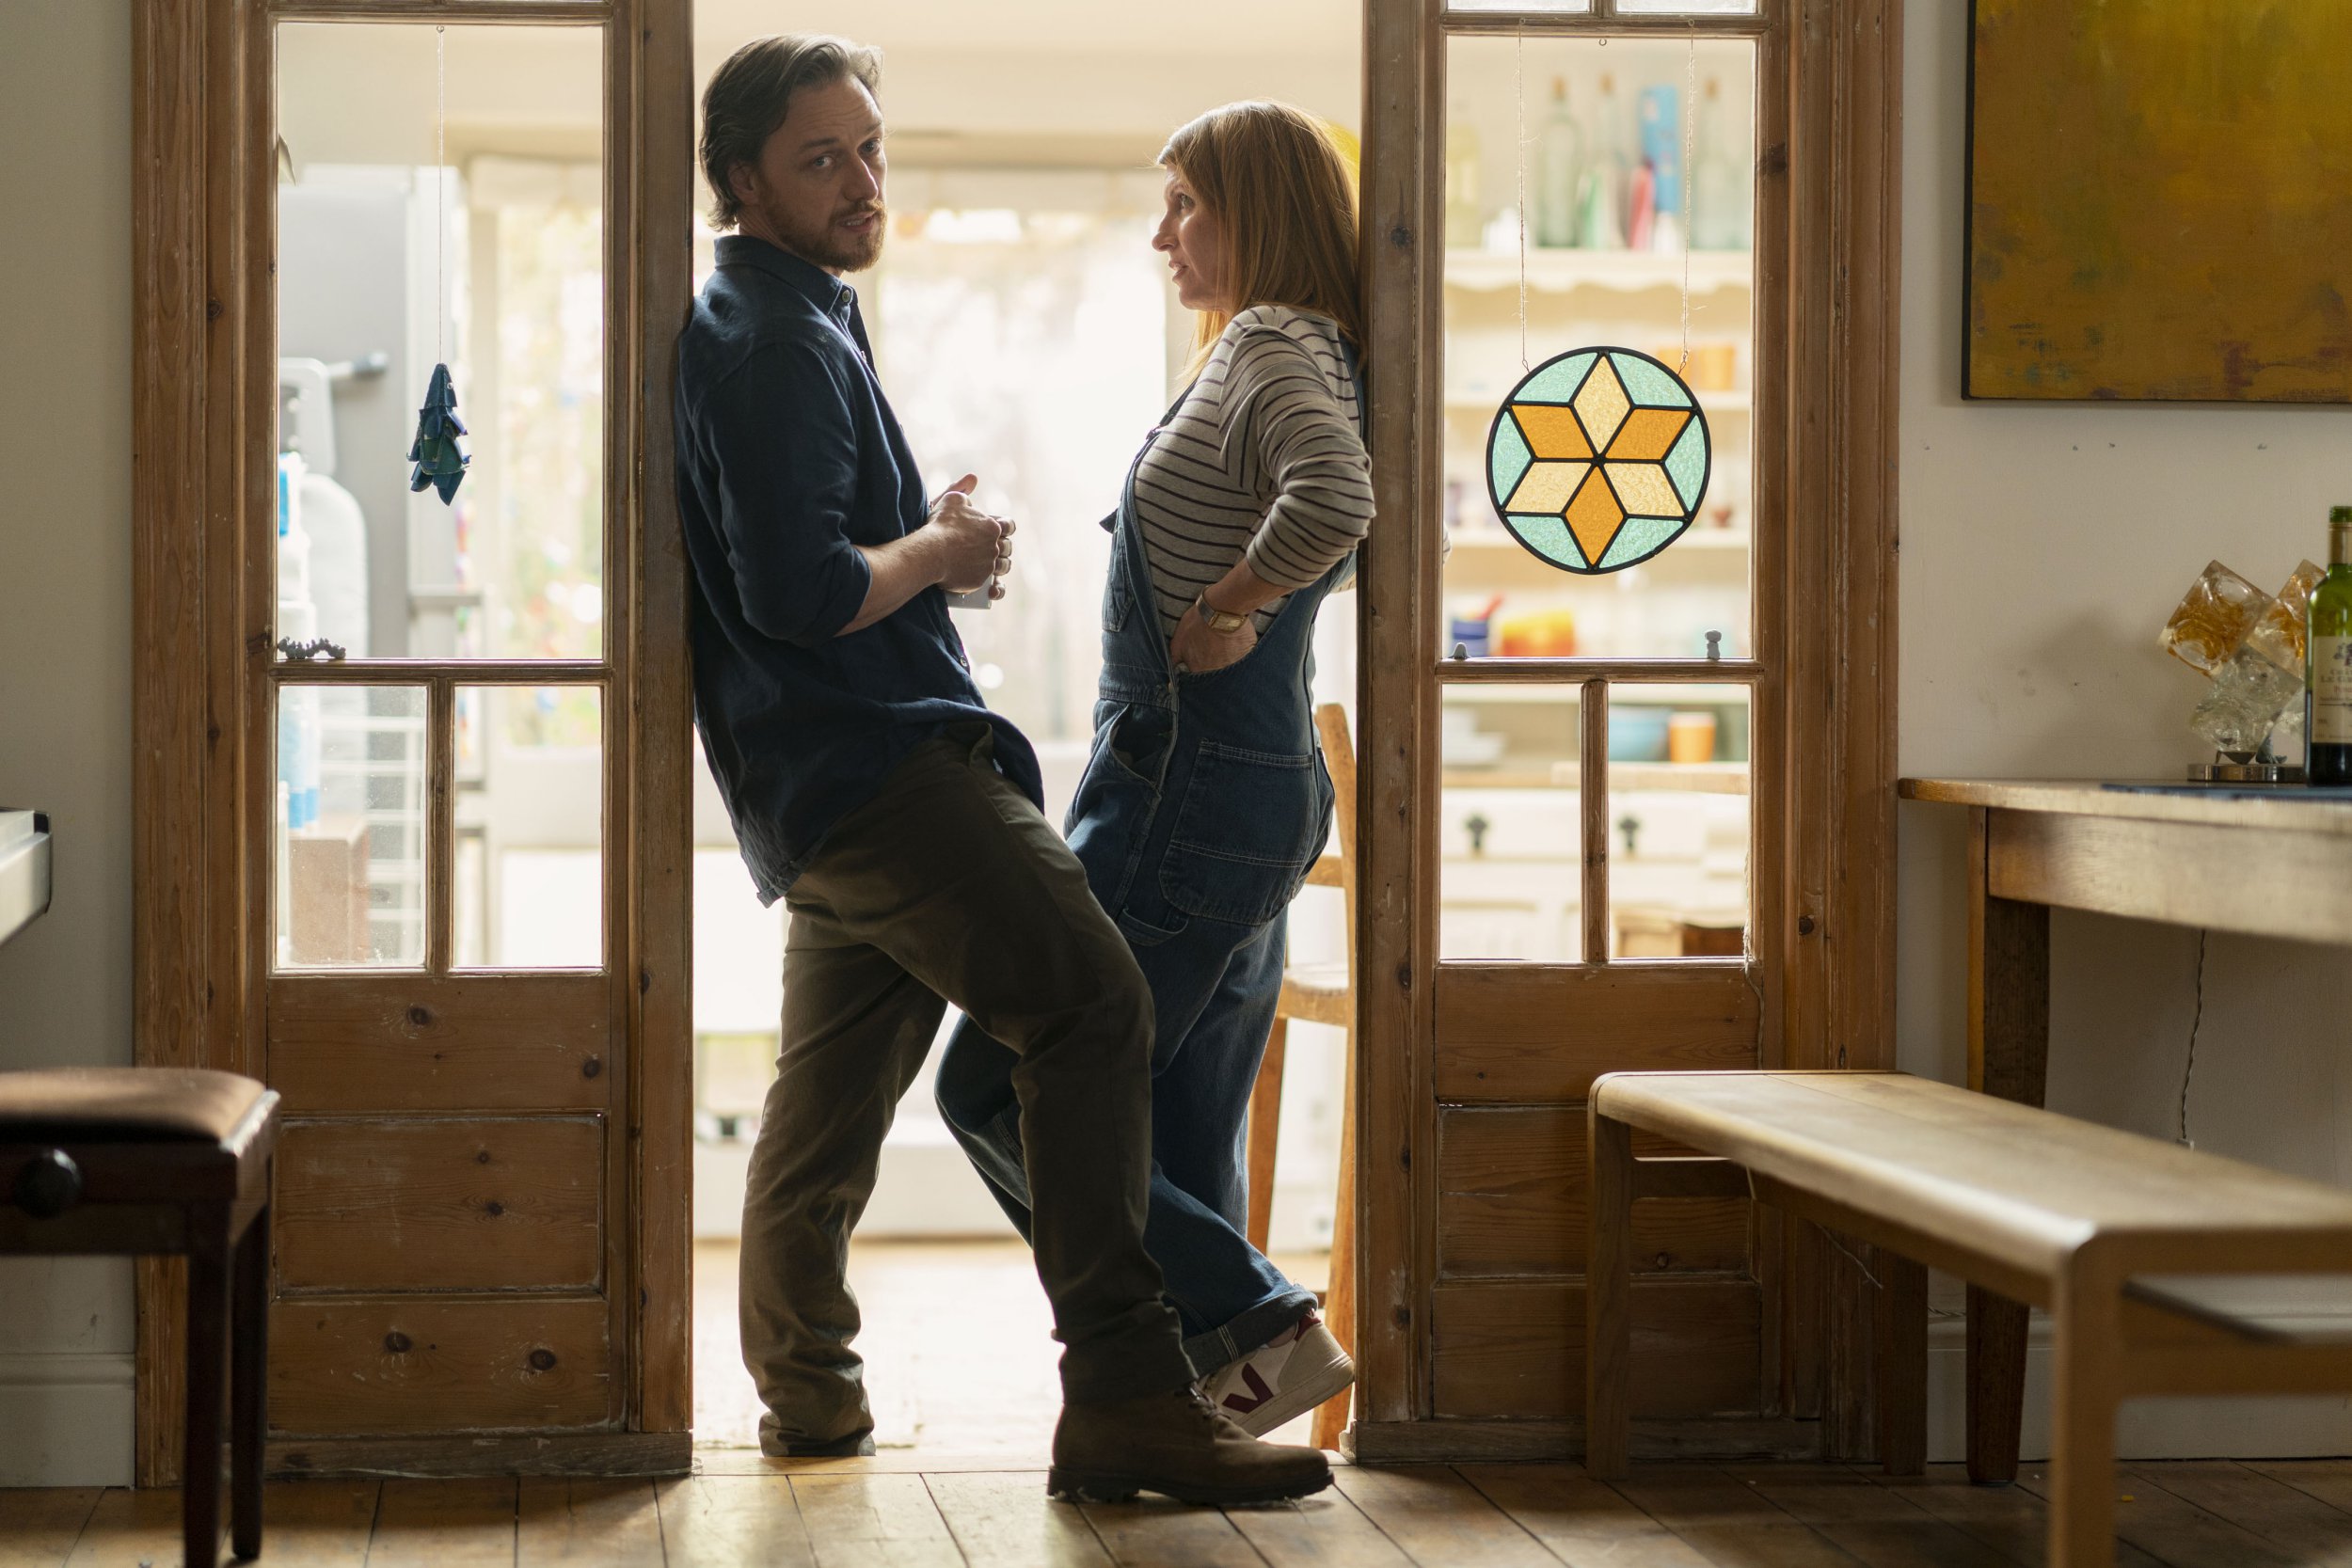 Whats On Tv Tonight Sharon Horgan And James Mcavoy Star In Lockdown